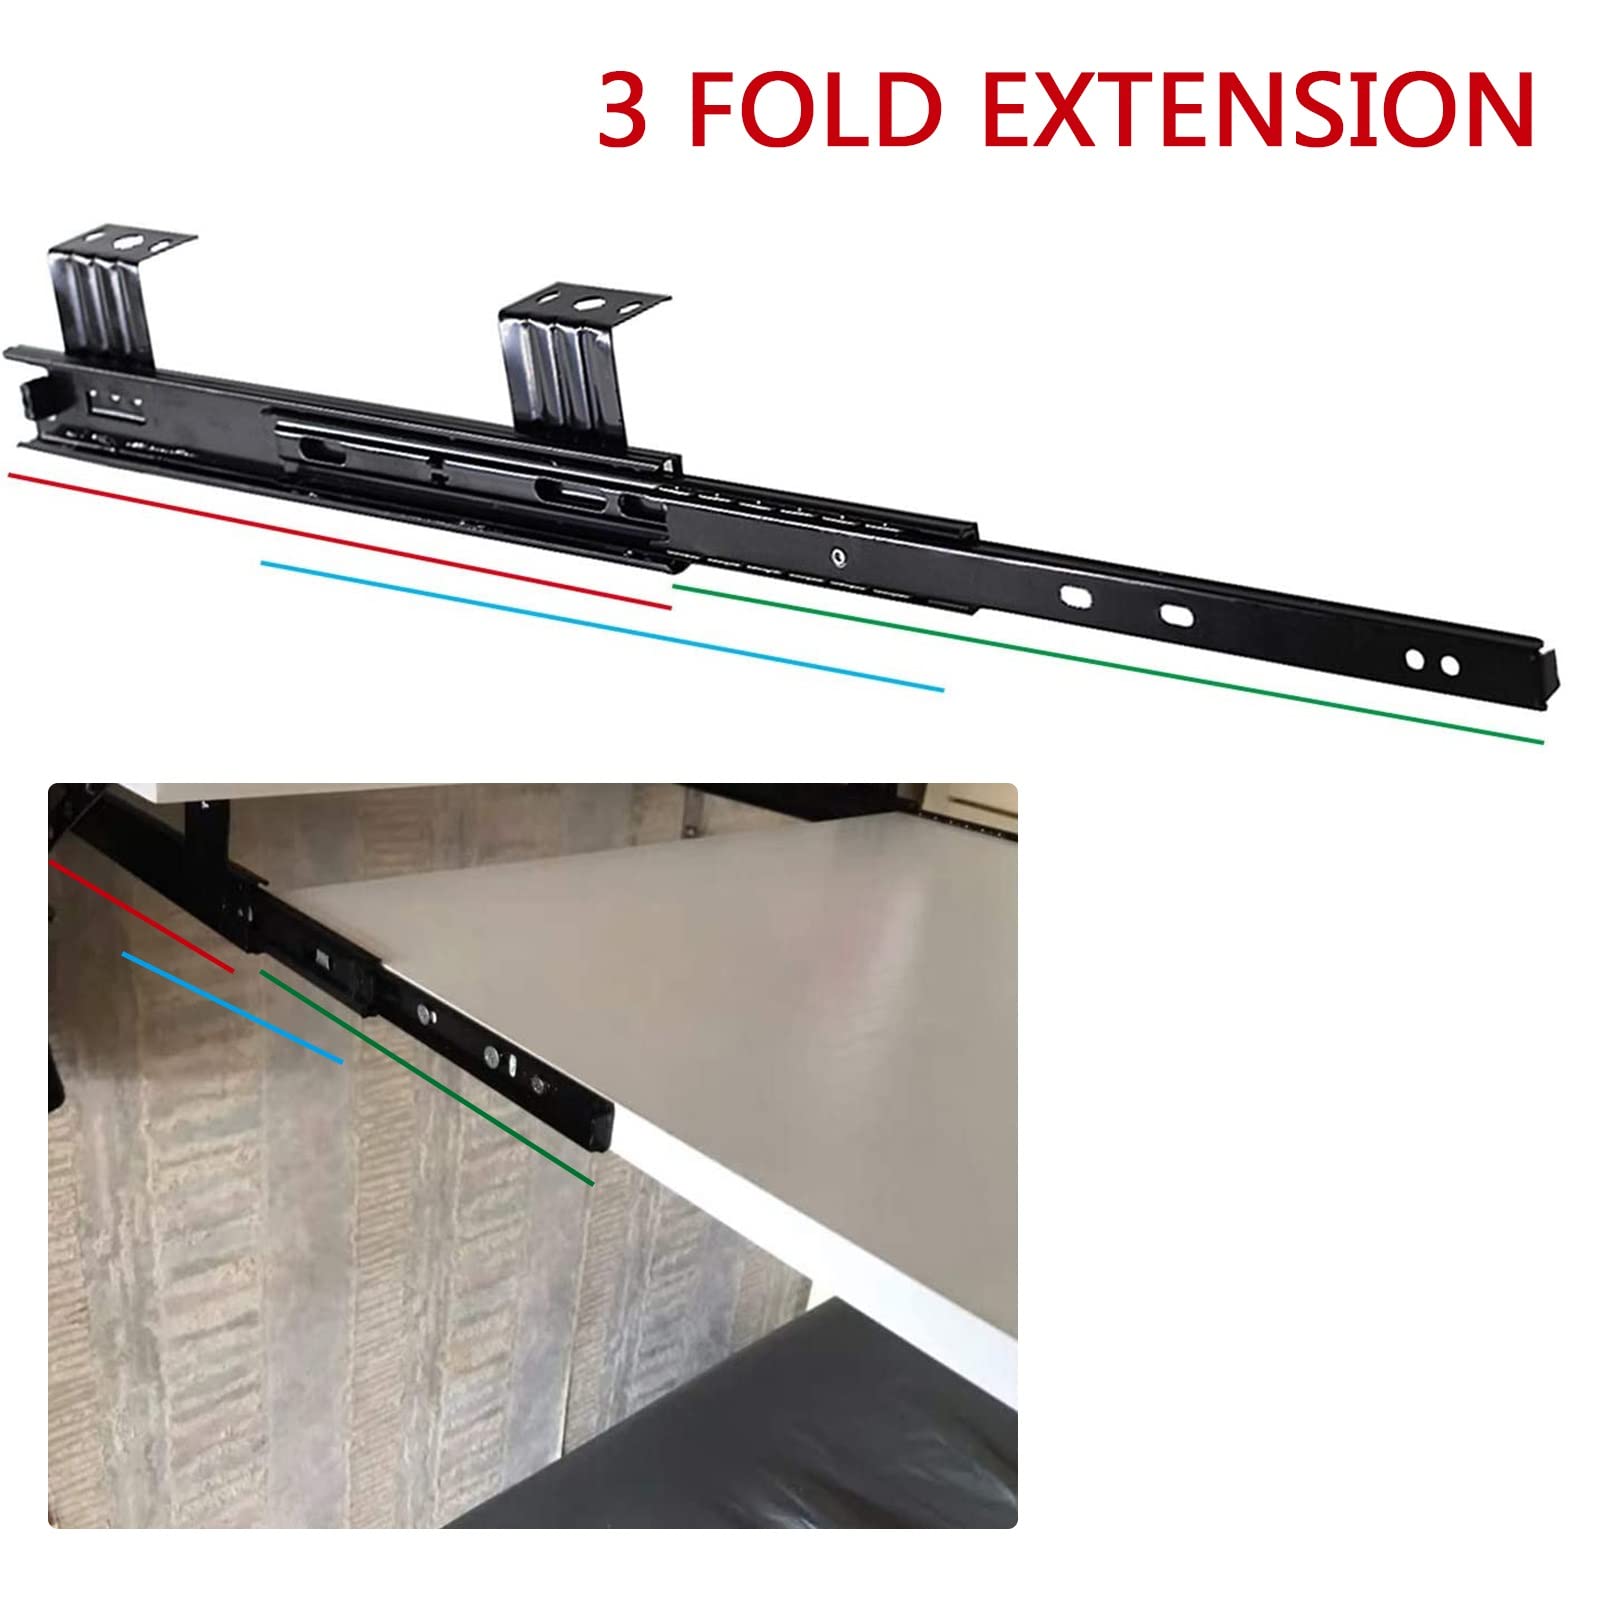 2 Pcs Heavy Duty Ball Bearing Slides Under Desk Keyboard Tray Runners 12inch - with Screws - Hanging Mount, 3-Sections Extension Rails Computer Slides Keyboard Drawer Slides (Black 290mm(12inch))